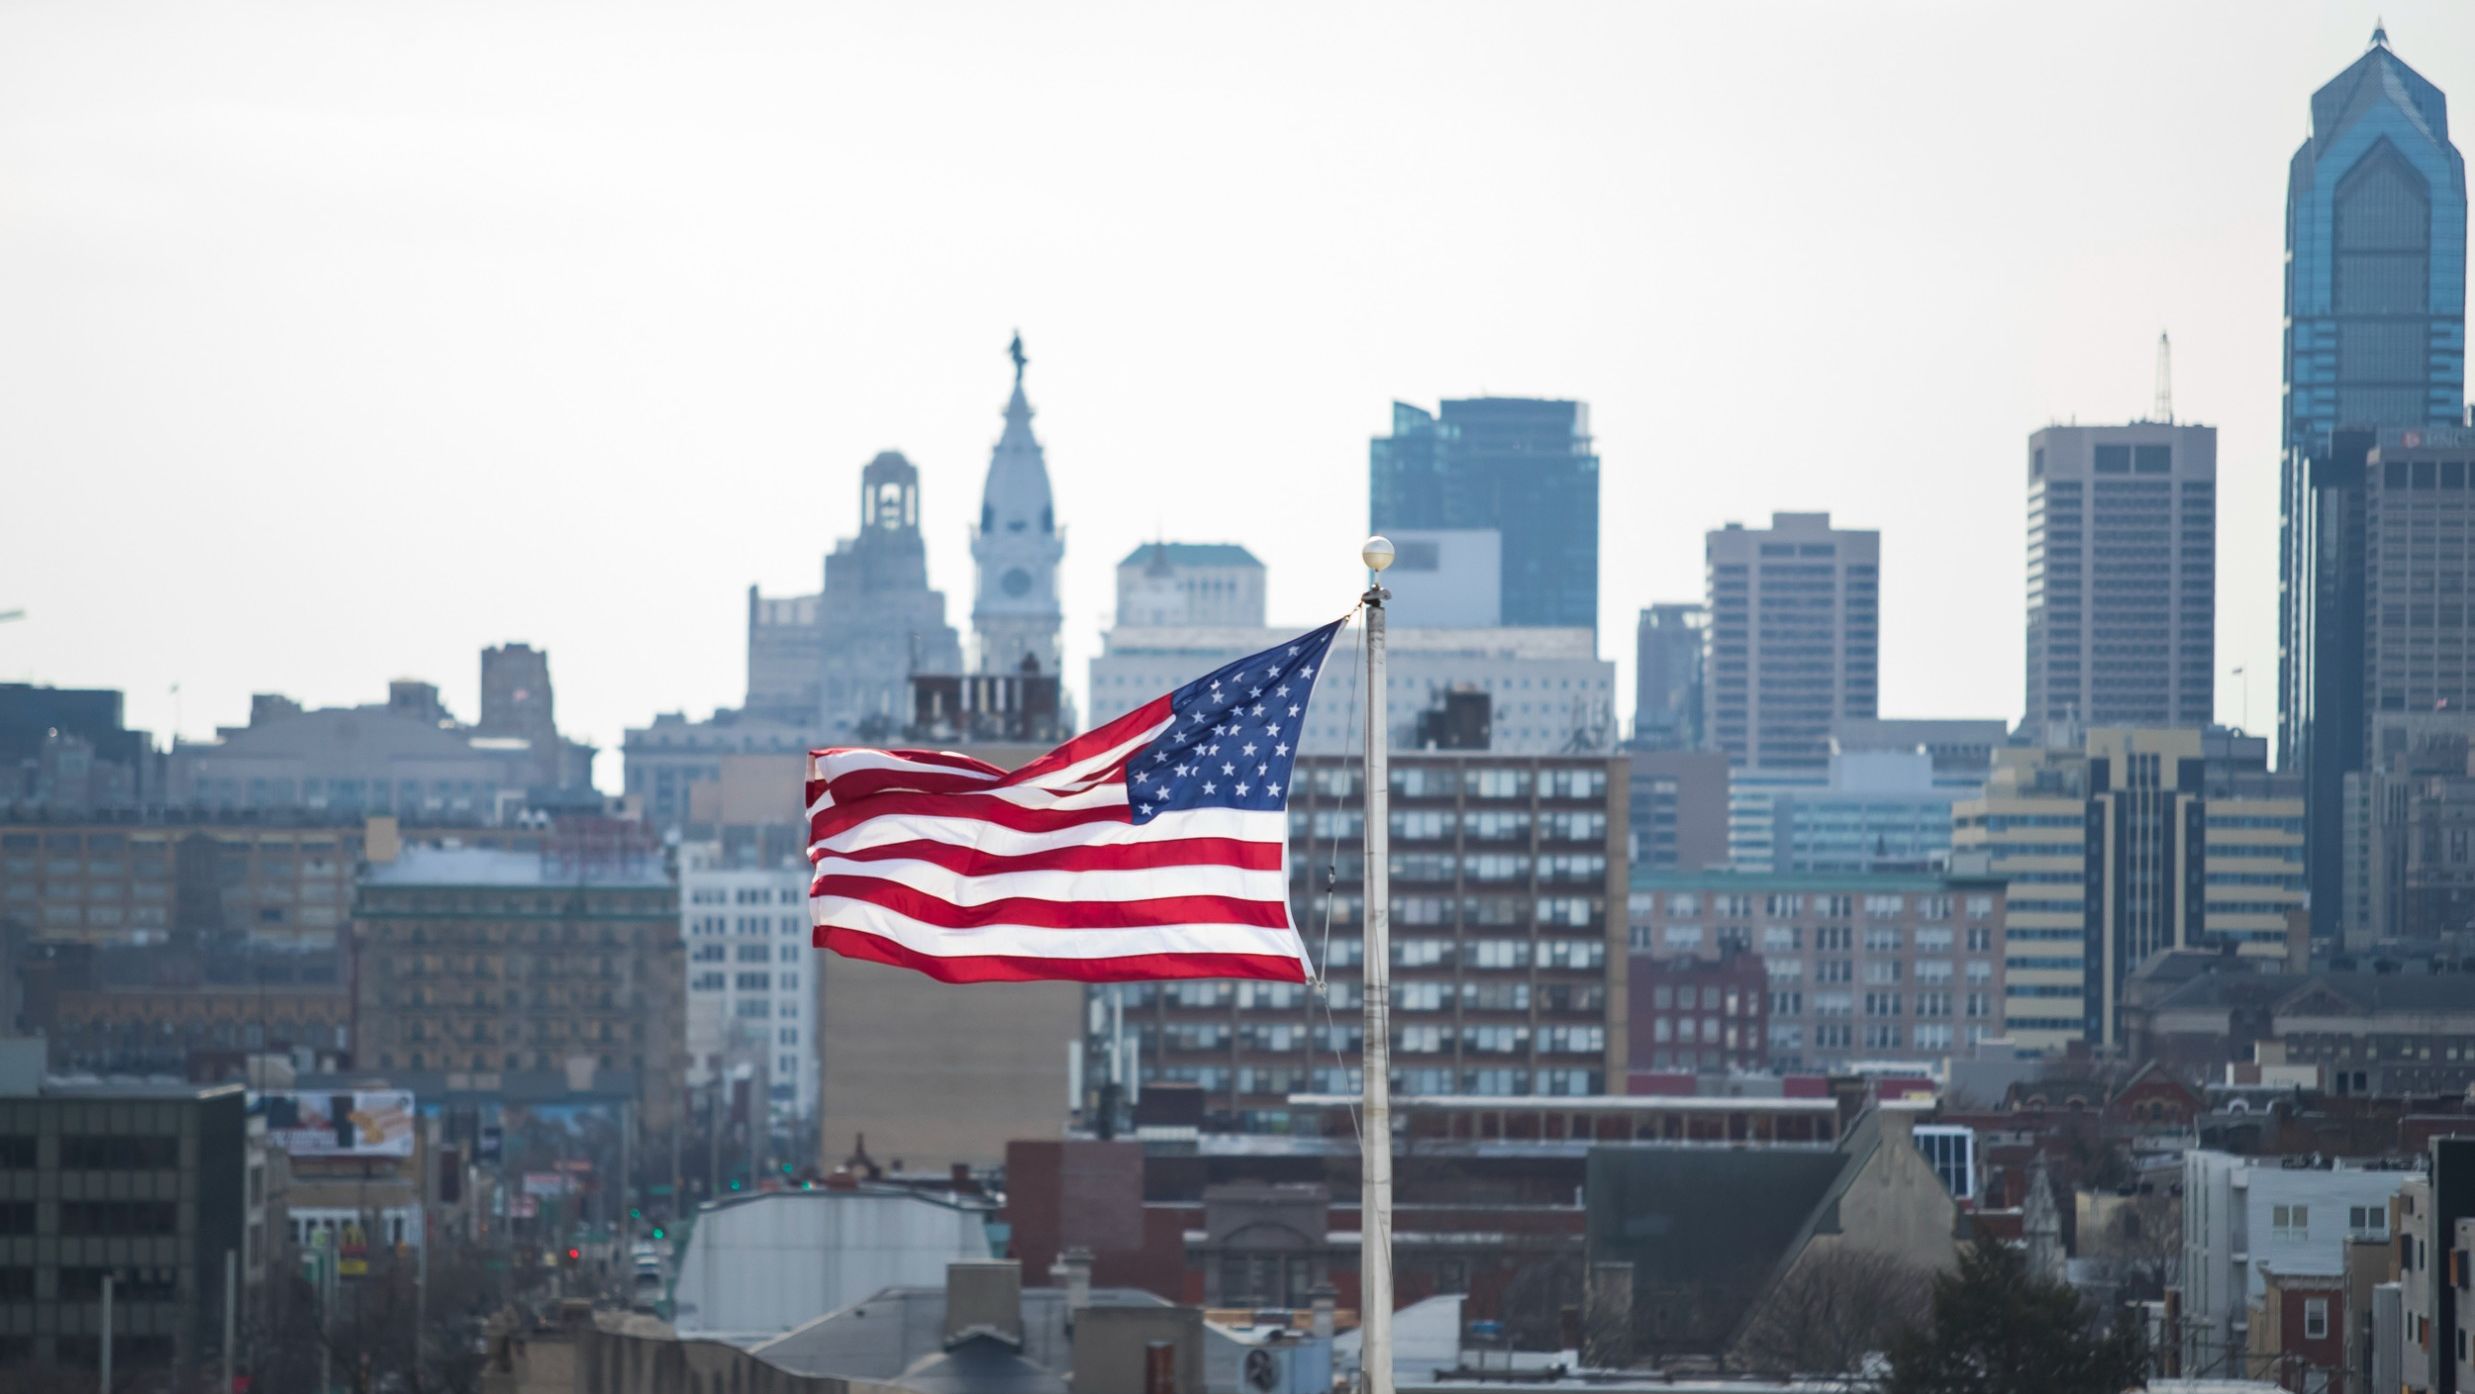 Image of an American flag in front of the Philadelphia skyline.